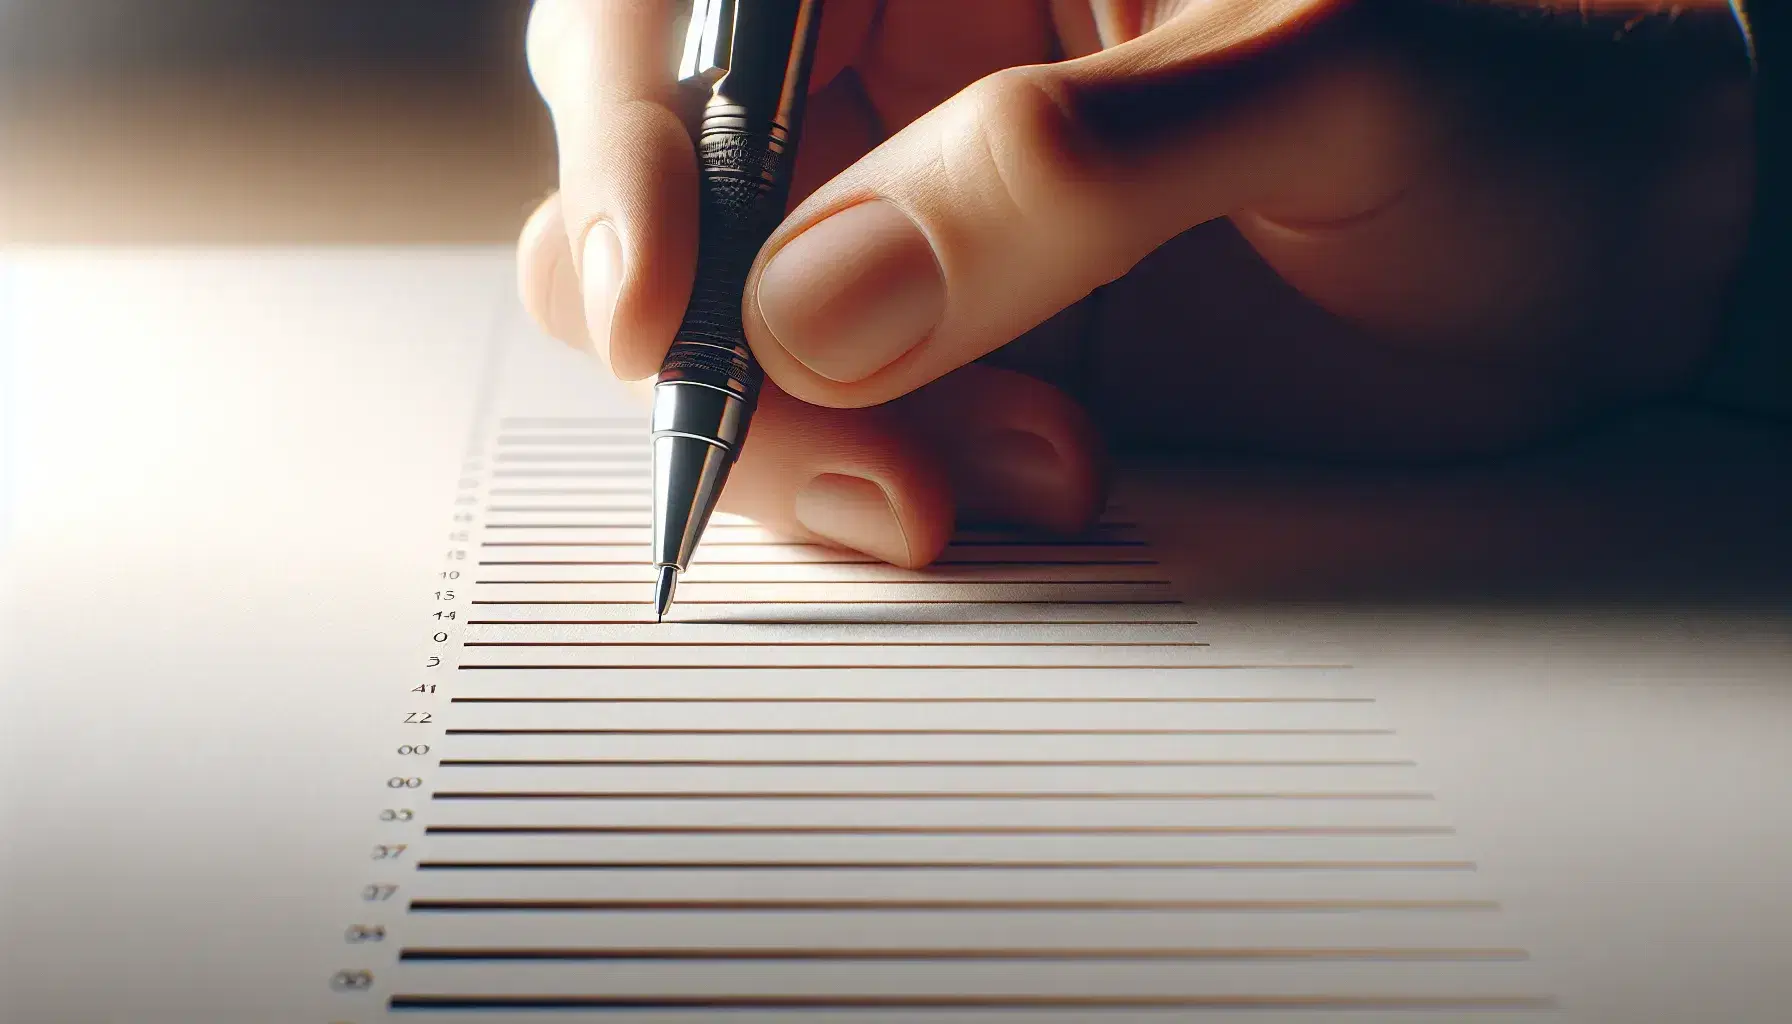 Close-up view of a hand holding a pen over a paper with seven unlabelled, incrementally longer horizontal lines, resembling a rating scale.